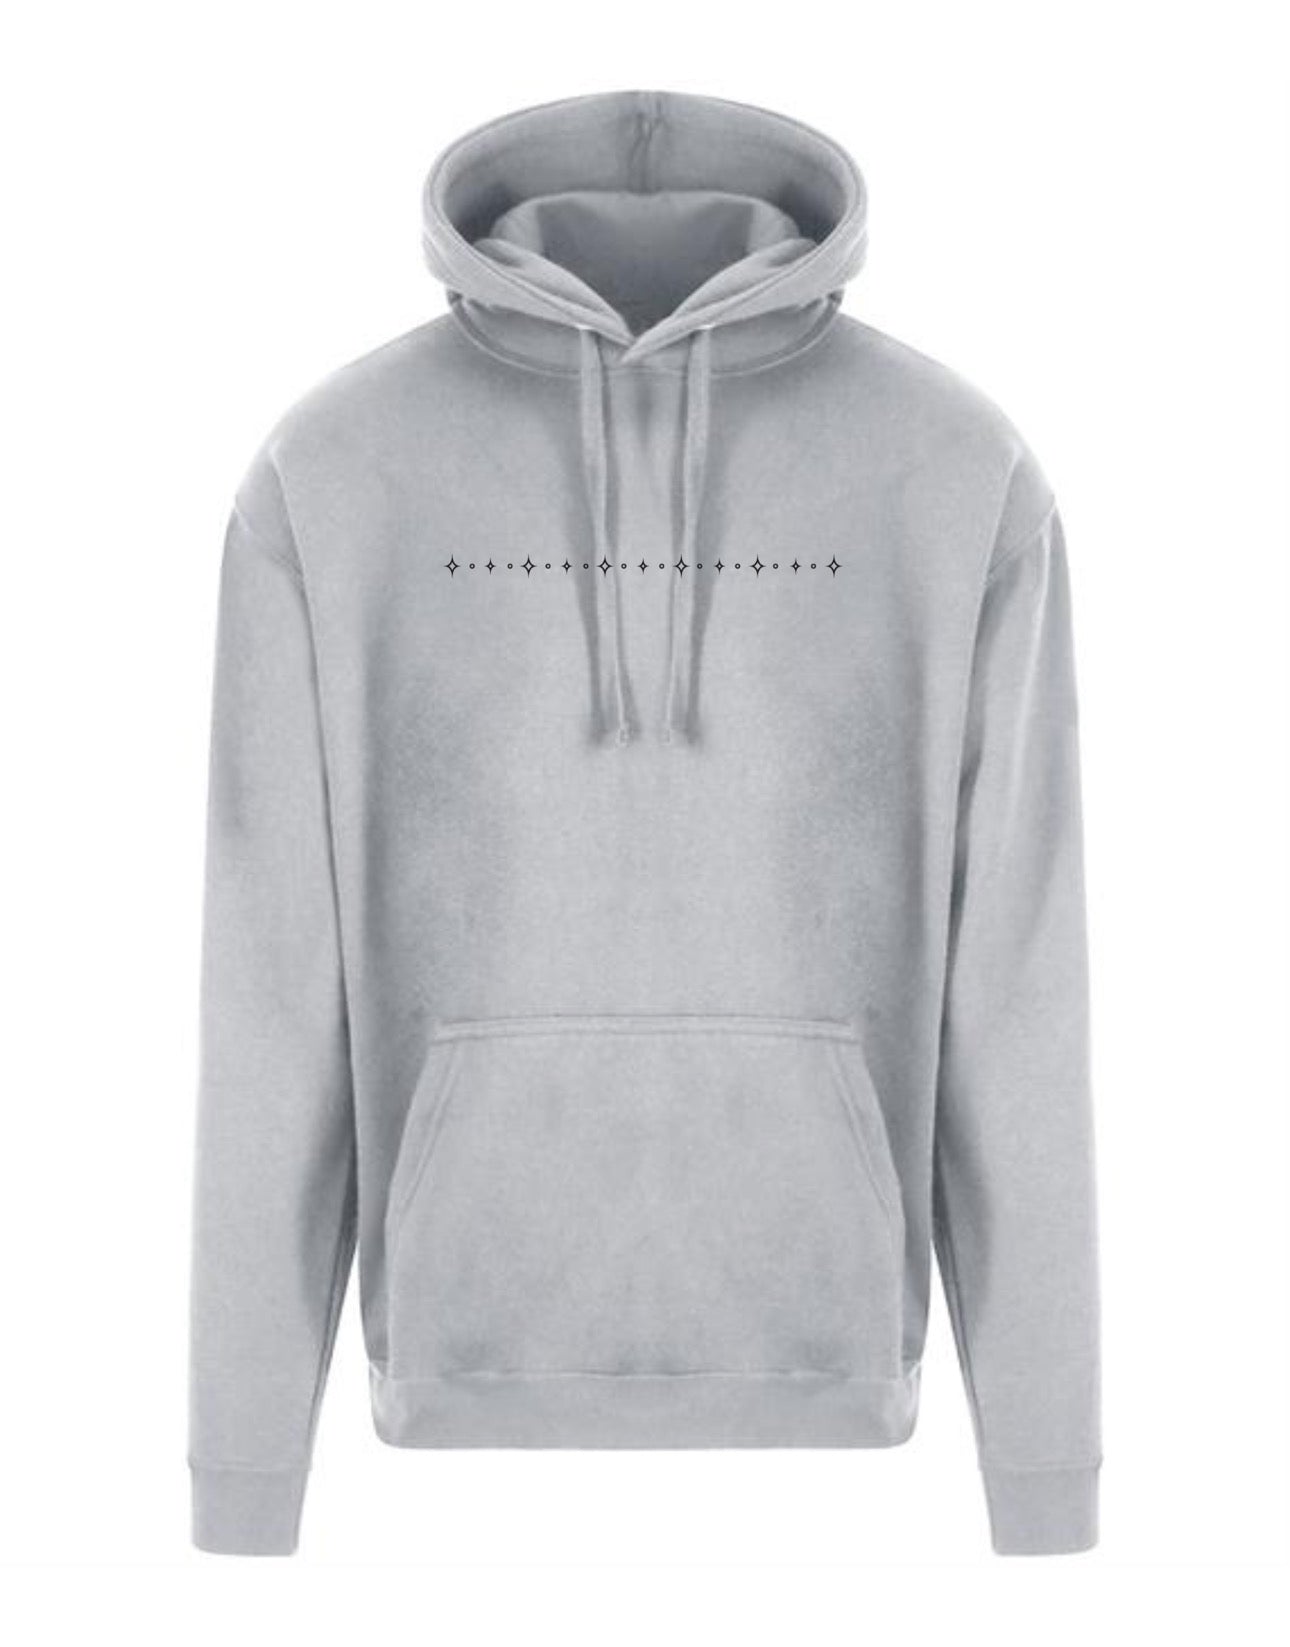 Light Grey "You're Too Close" Front & Back Printed Longline Unisex Hoodie